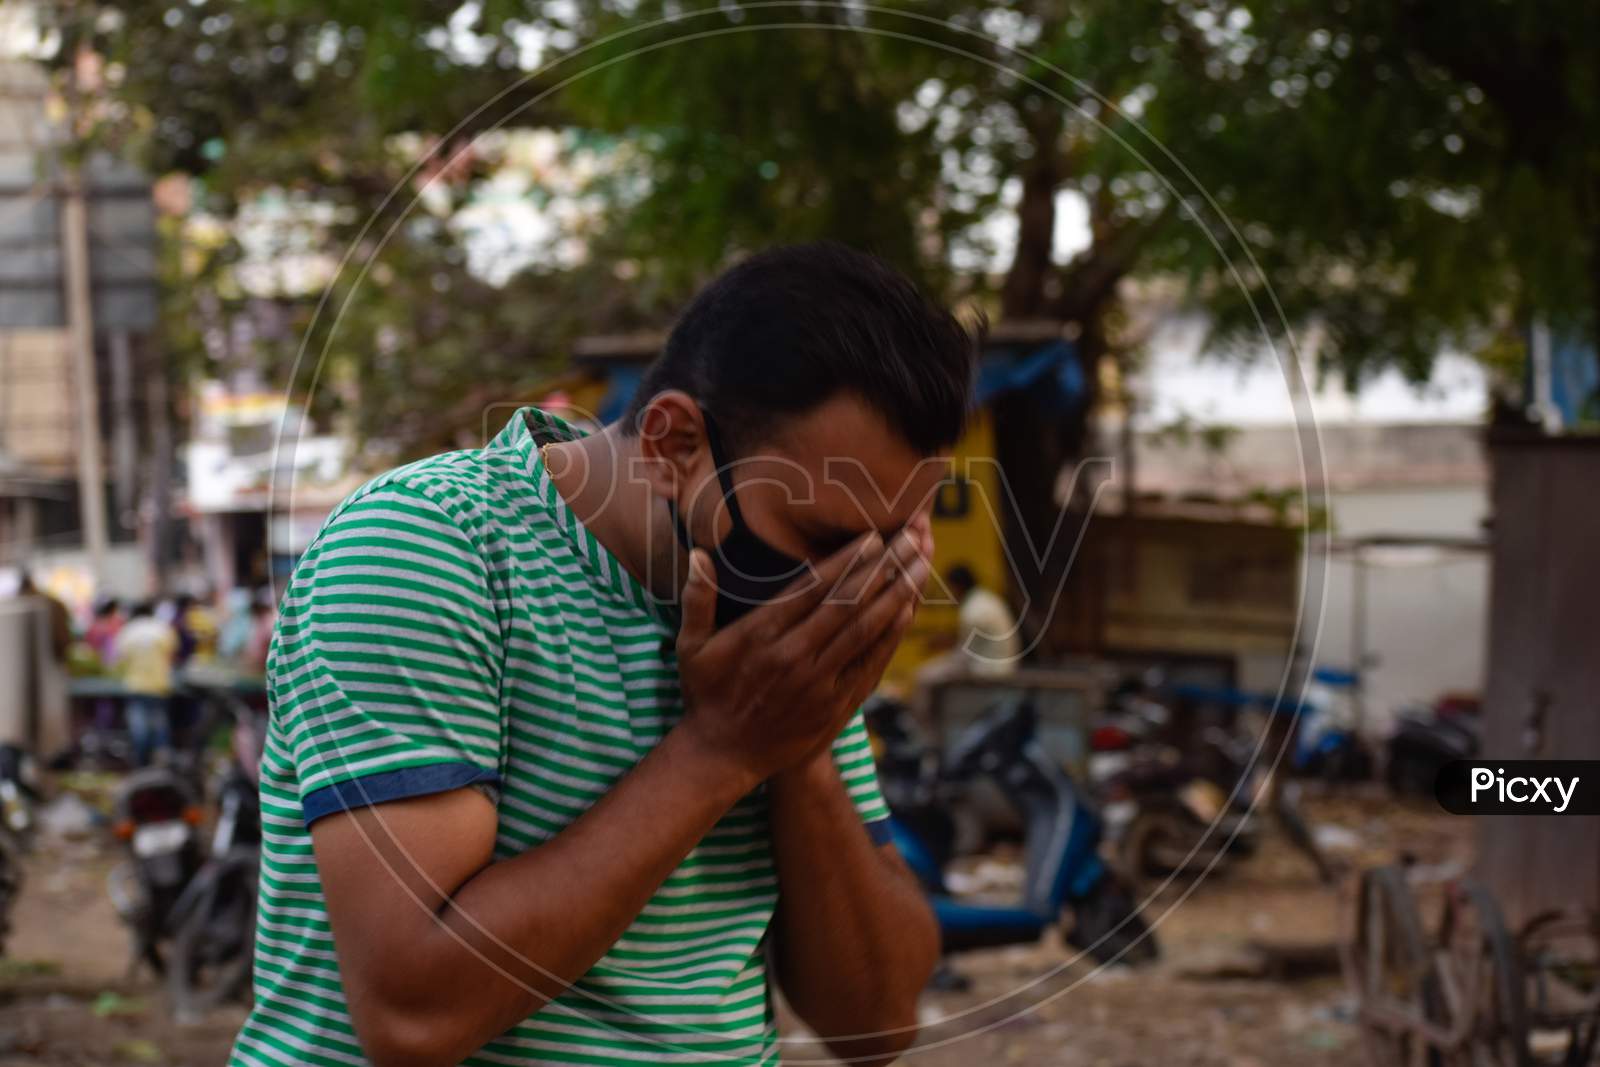 Bharuch, Gujarat/India - March 20, 2020: An Indian men feeling sick, coughing, wearing protective mask against transmissible infectious diseases and as protection against Covid-19 Corona virus.